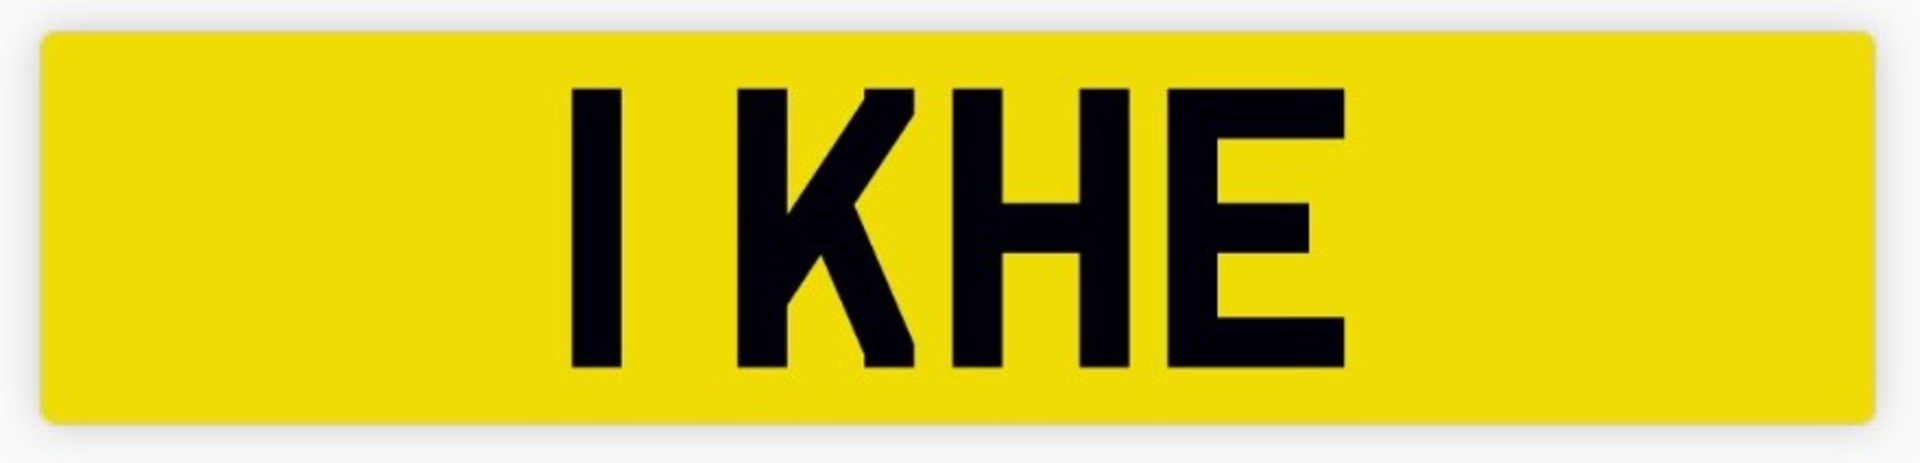 Cherished Registration Plate 1 KHE on Retention Certificate (Documents in Office)